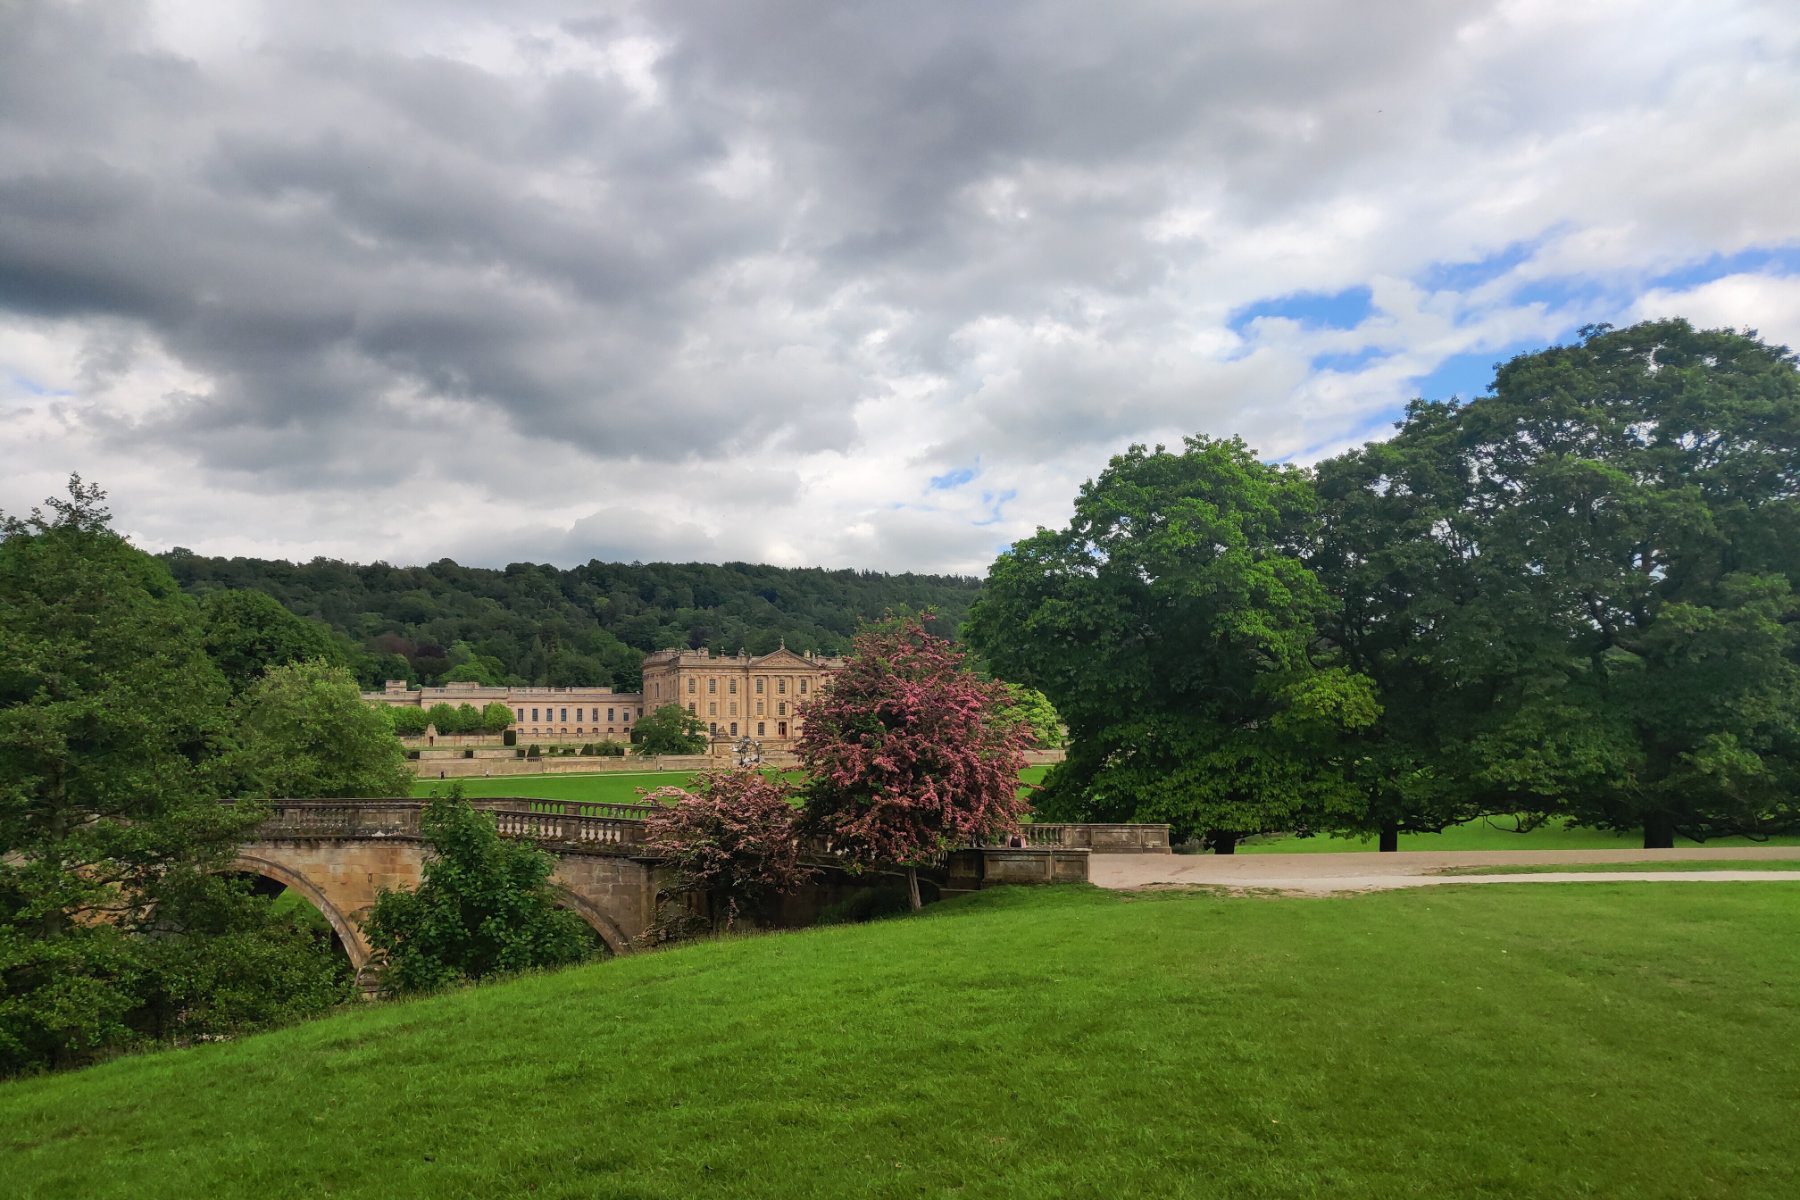 Chatsworth house in the distance of a landscape